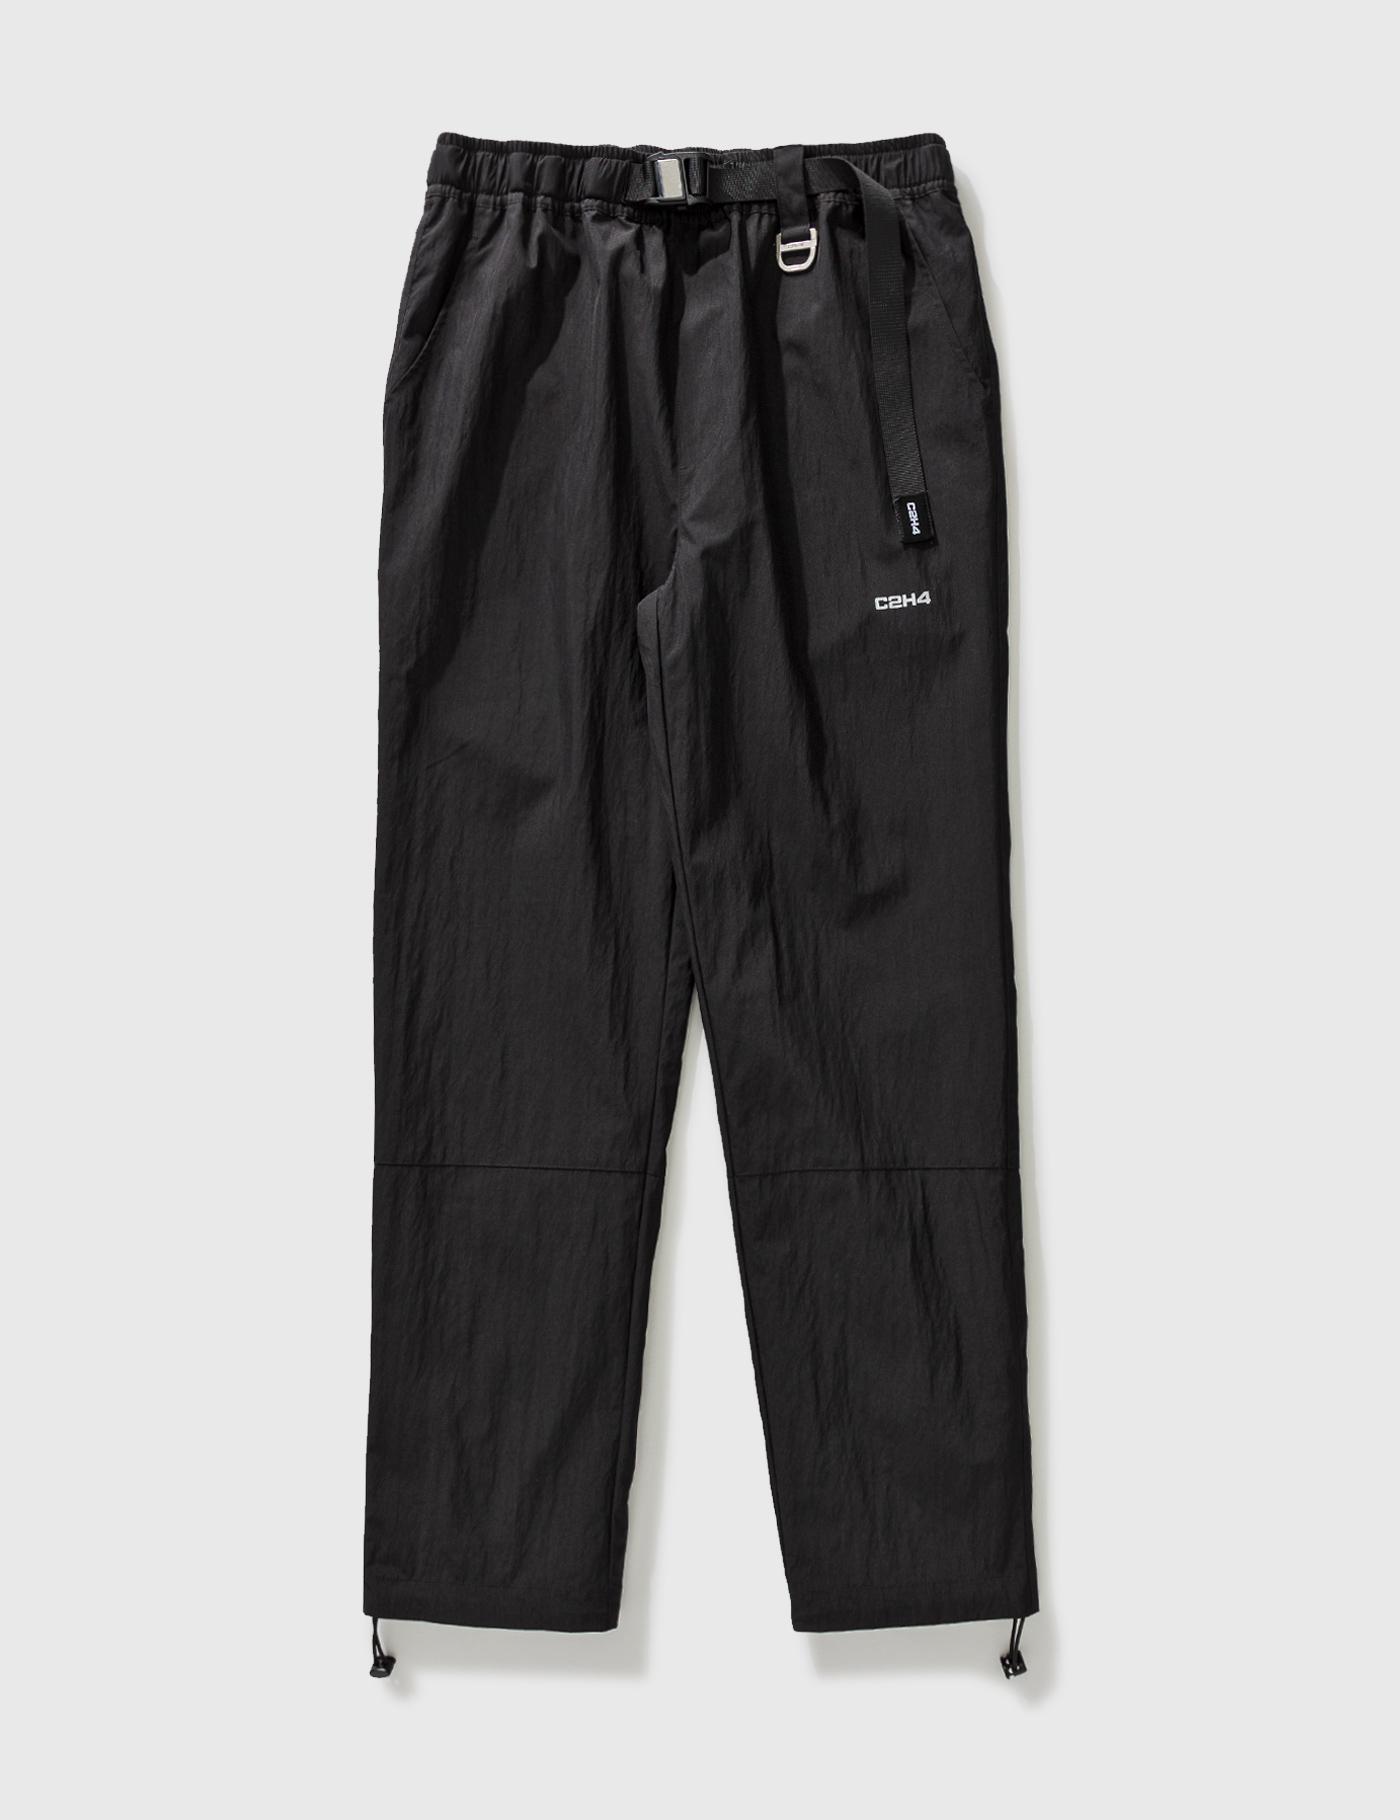 Staff Uniform STAI Buckle Track Pants by C2H4